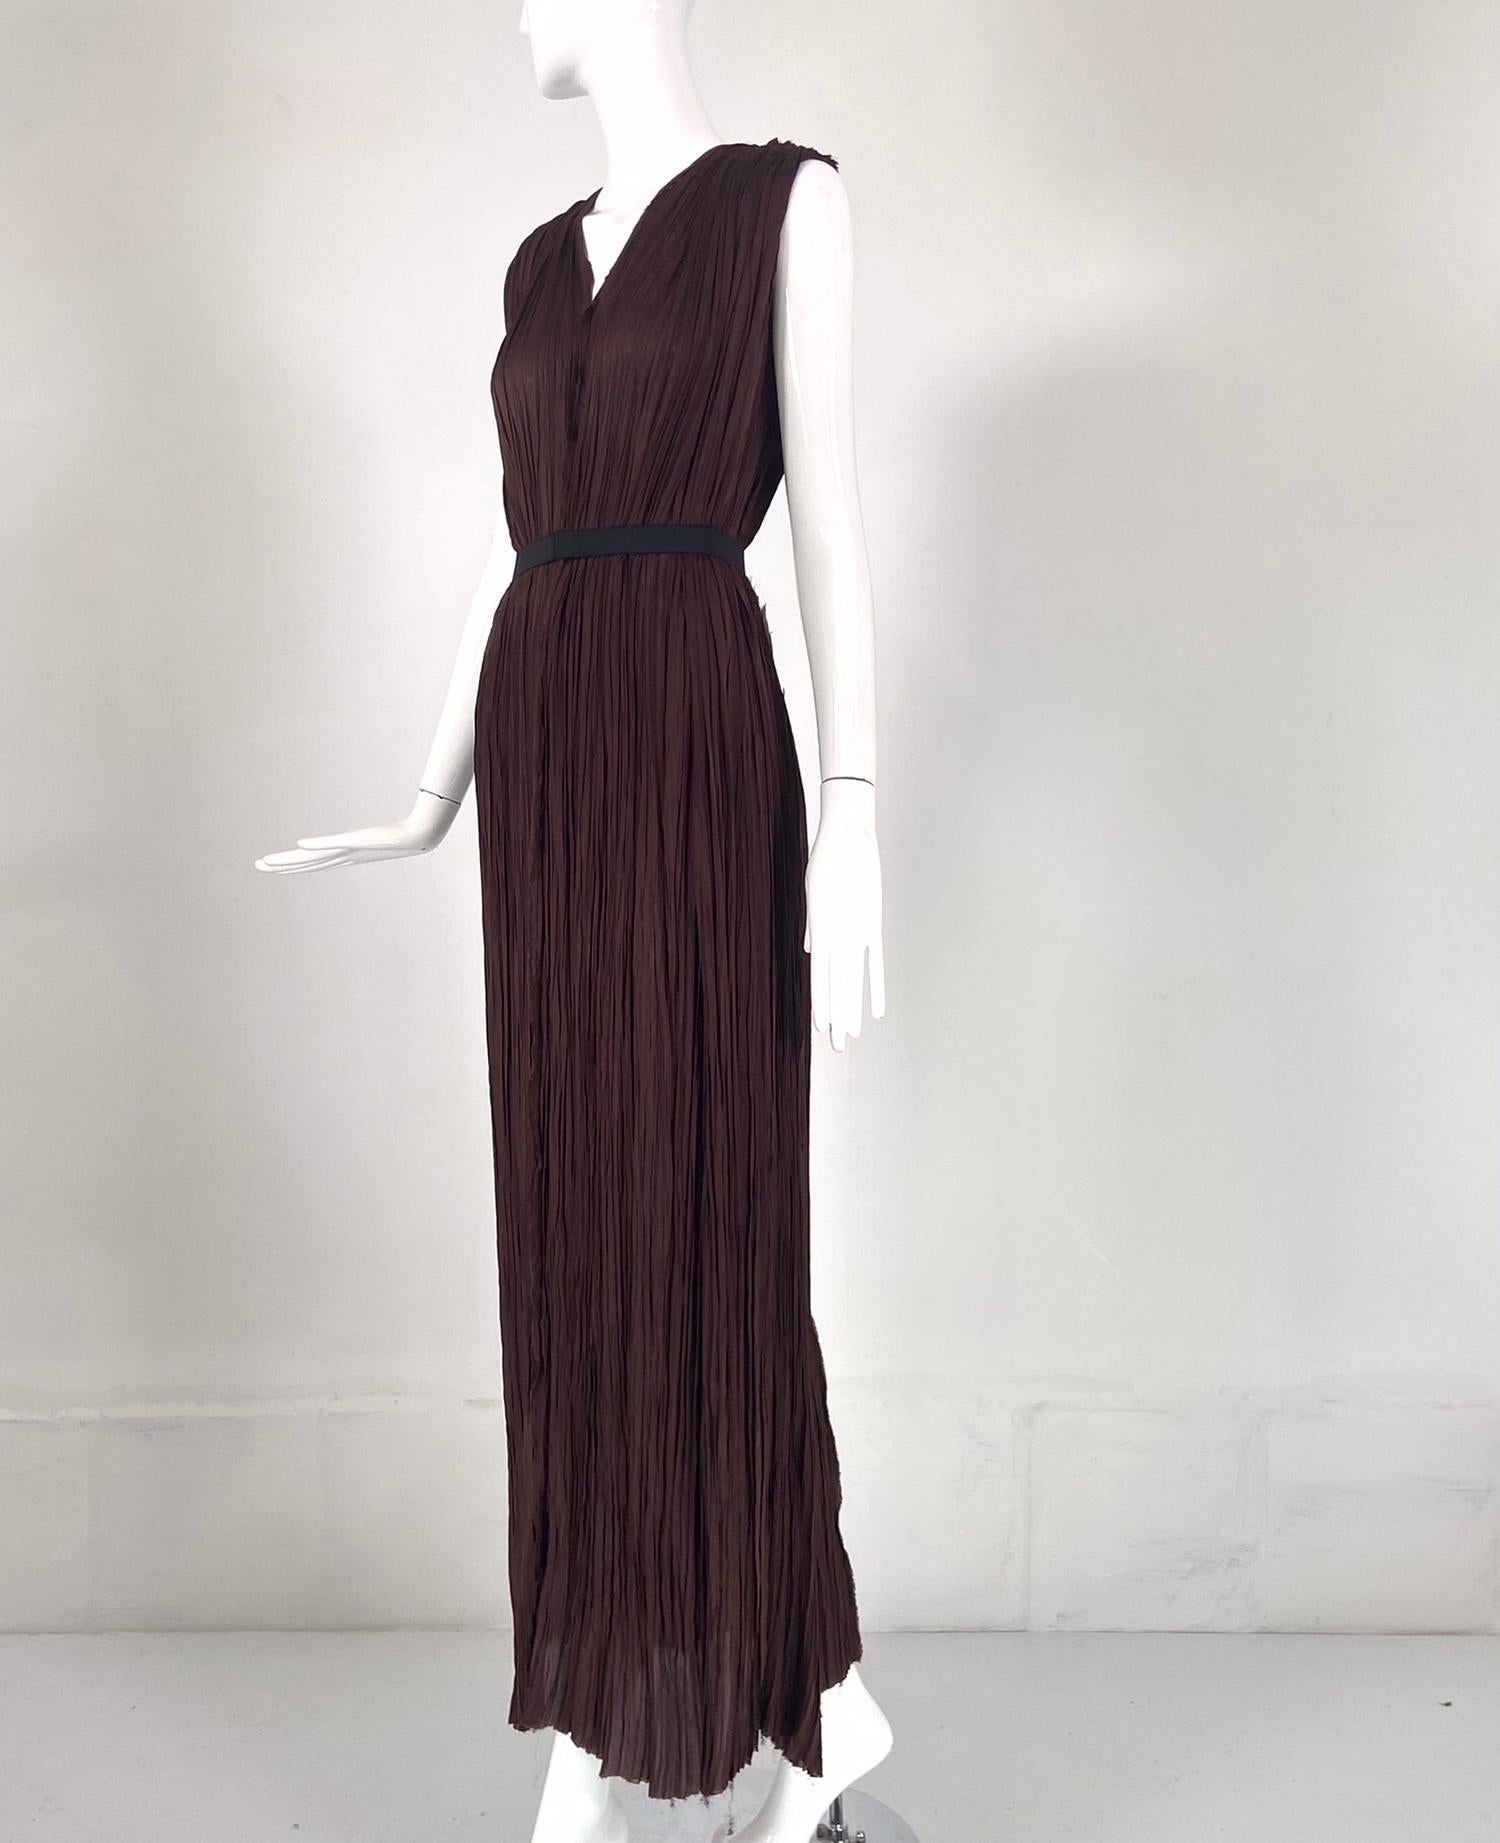 Lanvin Ete' 2005 Fortuny Pleated V Neck Maxi Dress Chocolate Brown Alber Elbaz 3